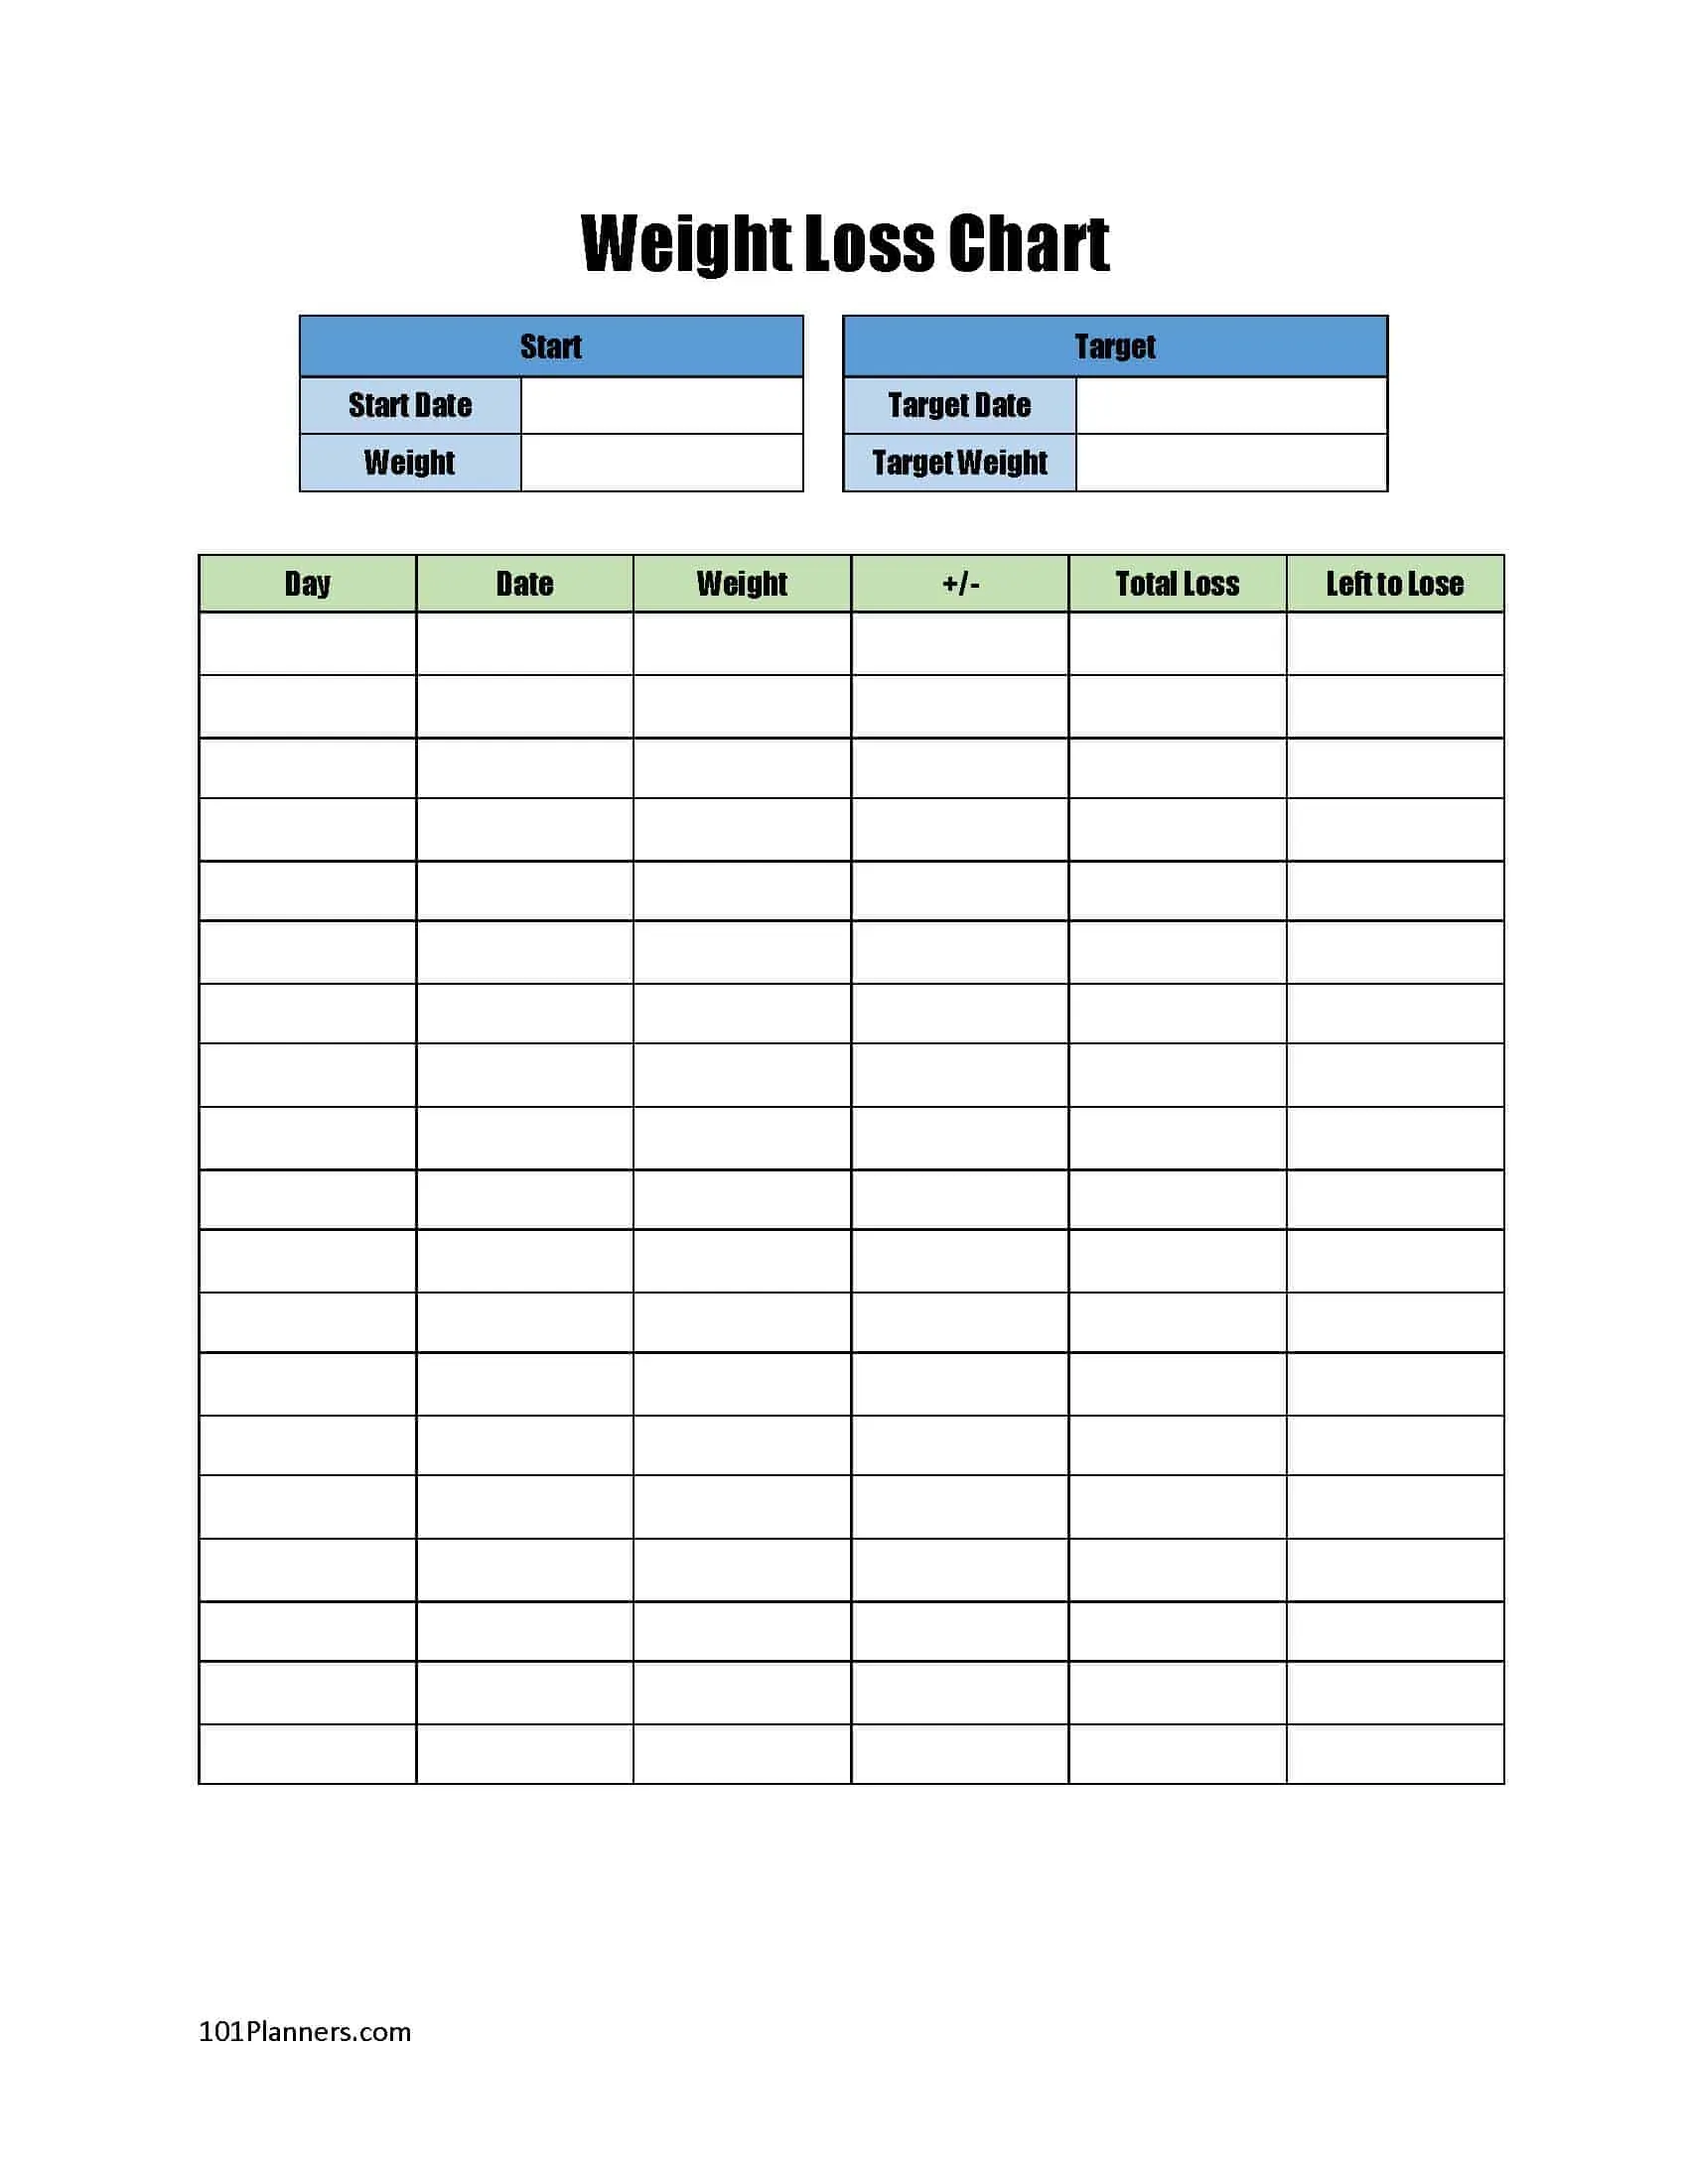 Monthly Weight Tracker | Track Body Weight Changes | Instant Download